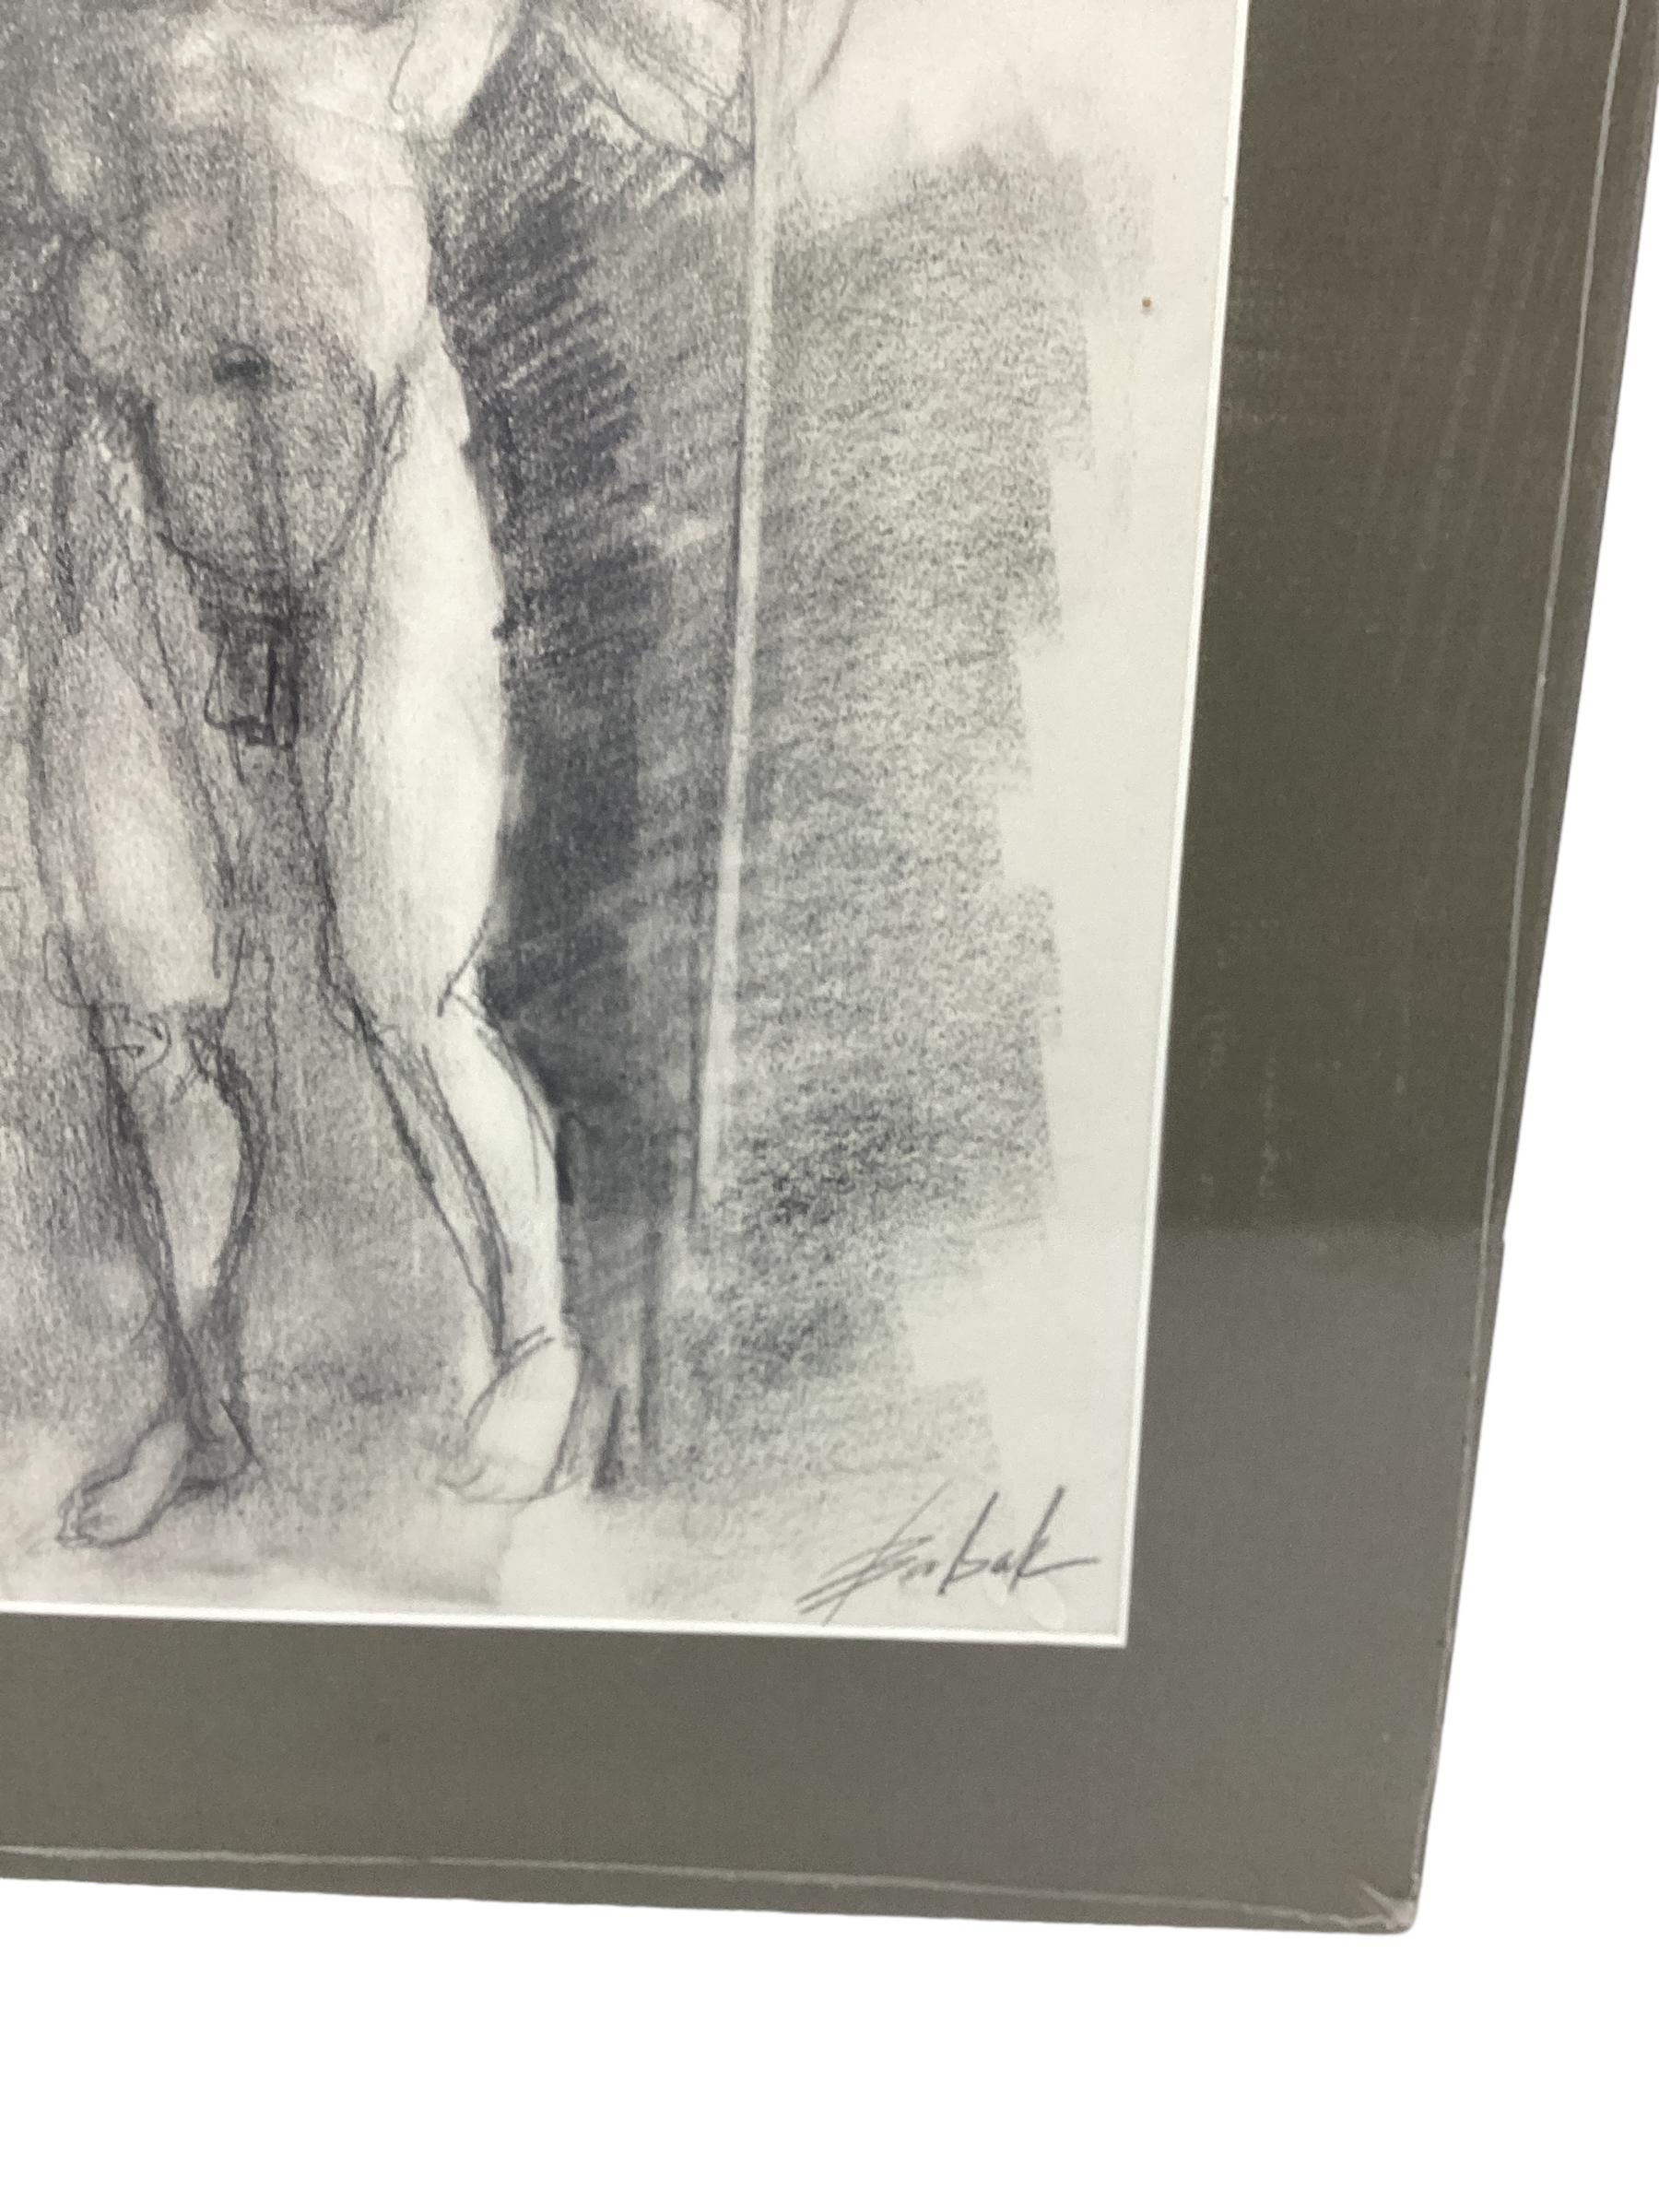 Set of 2 Mid Century Male Charcoal Drawings. One depicts a male in the process of undressing while the other shows a fully nude male. Both are signed but signature is difficult to decipher.